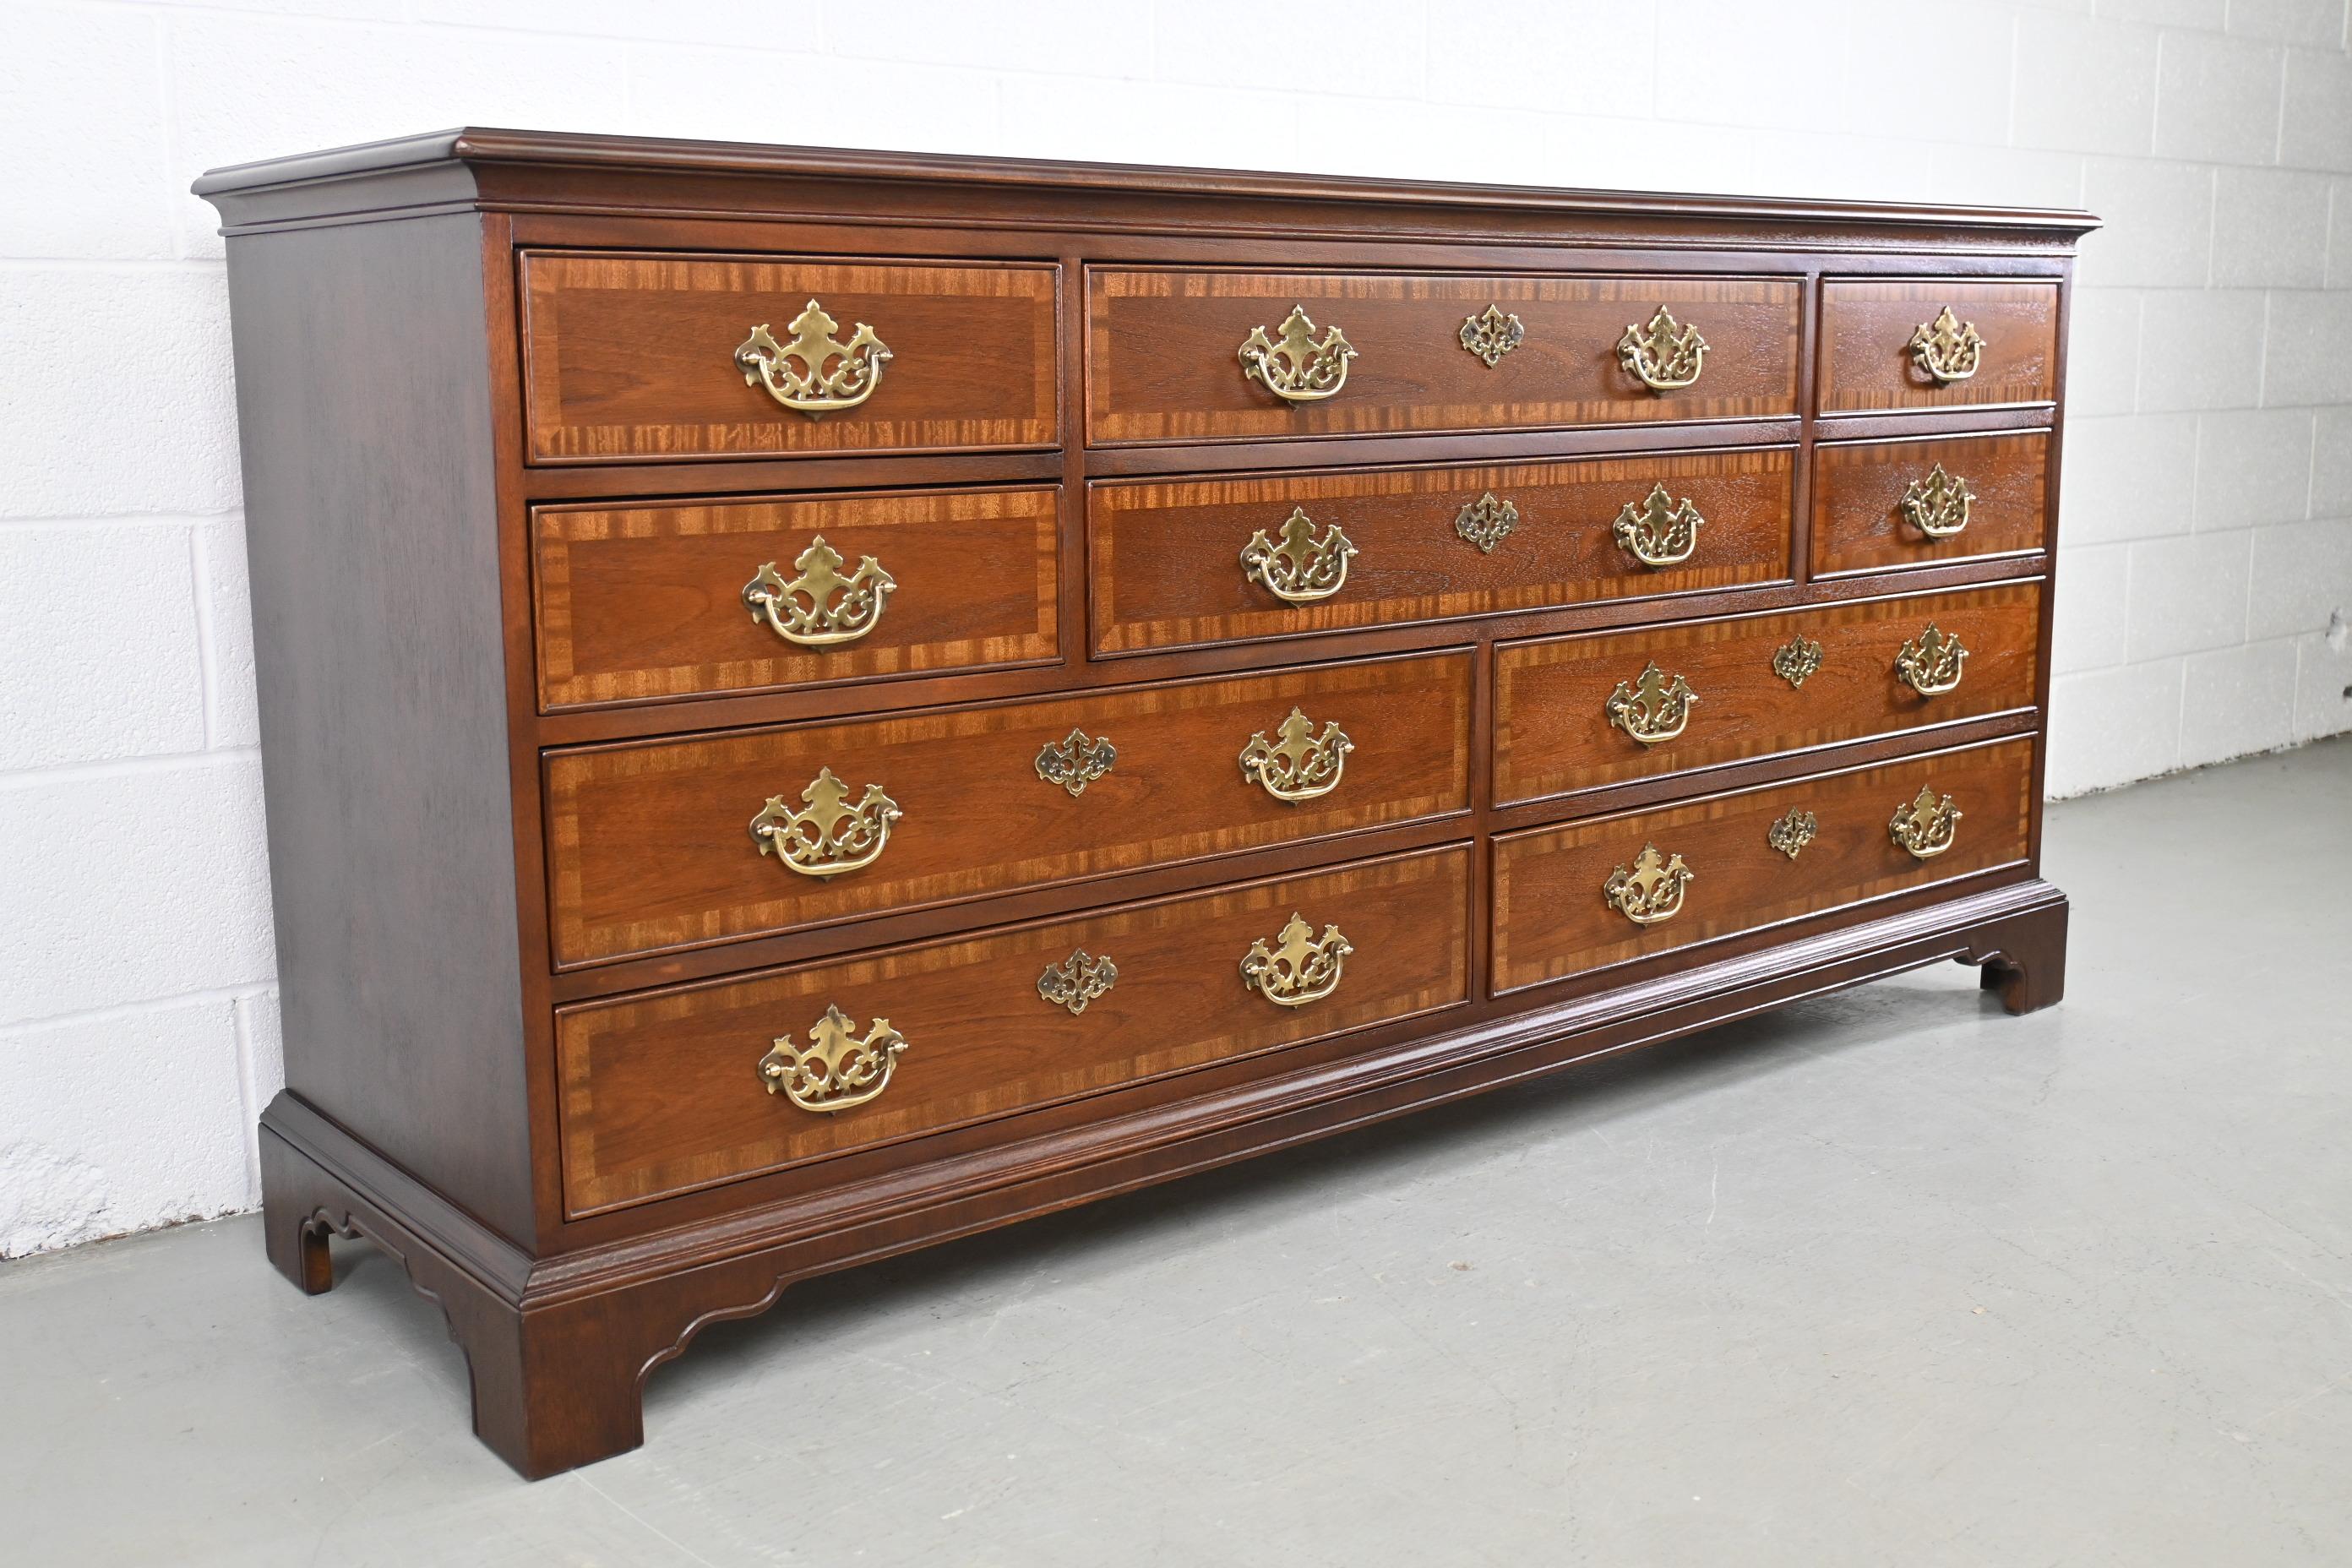 Drexel furniture Georgian mahogany banded ten drawer dresser

Drexel Furniture, USA, 1980s

72 Wide x 20 Deep x 34.5 High.

Georgian style mahogany banded ten drawer dresser with brass accents.

Professionally Refinished. Excellent condition.